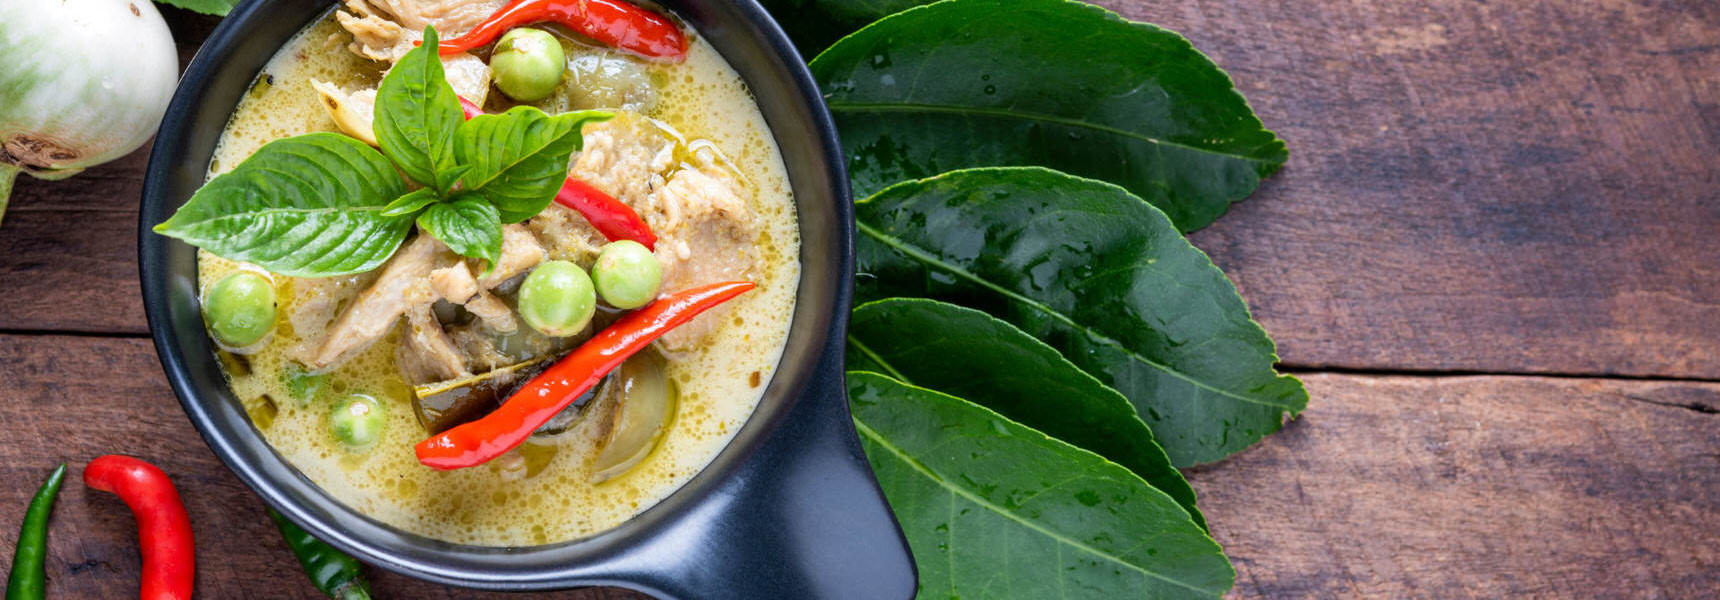 Phuket Food and Drink Tours